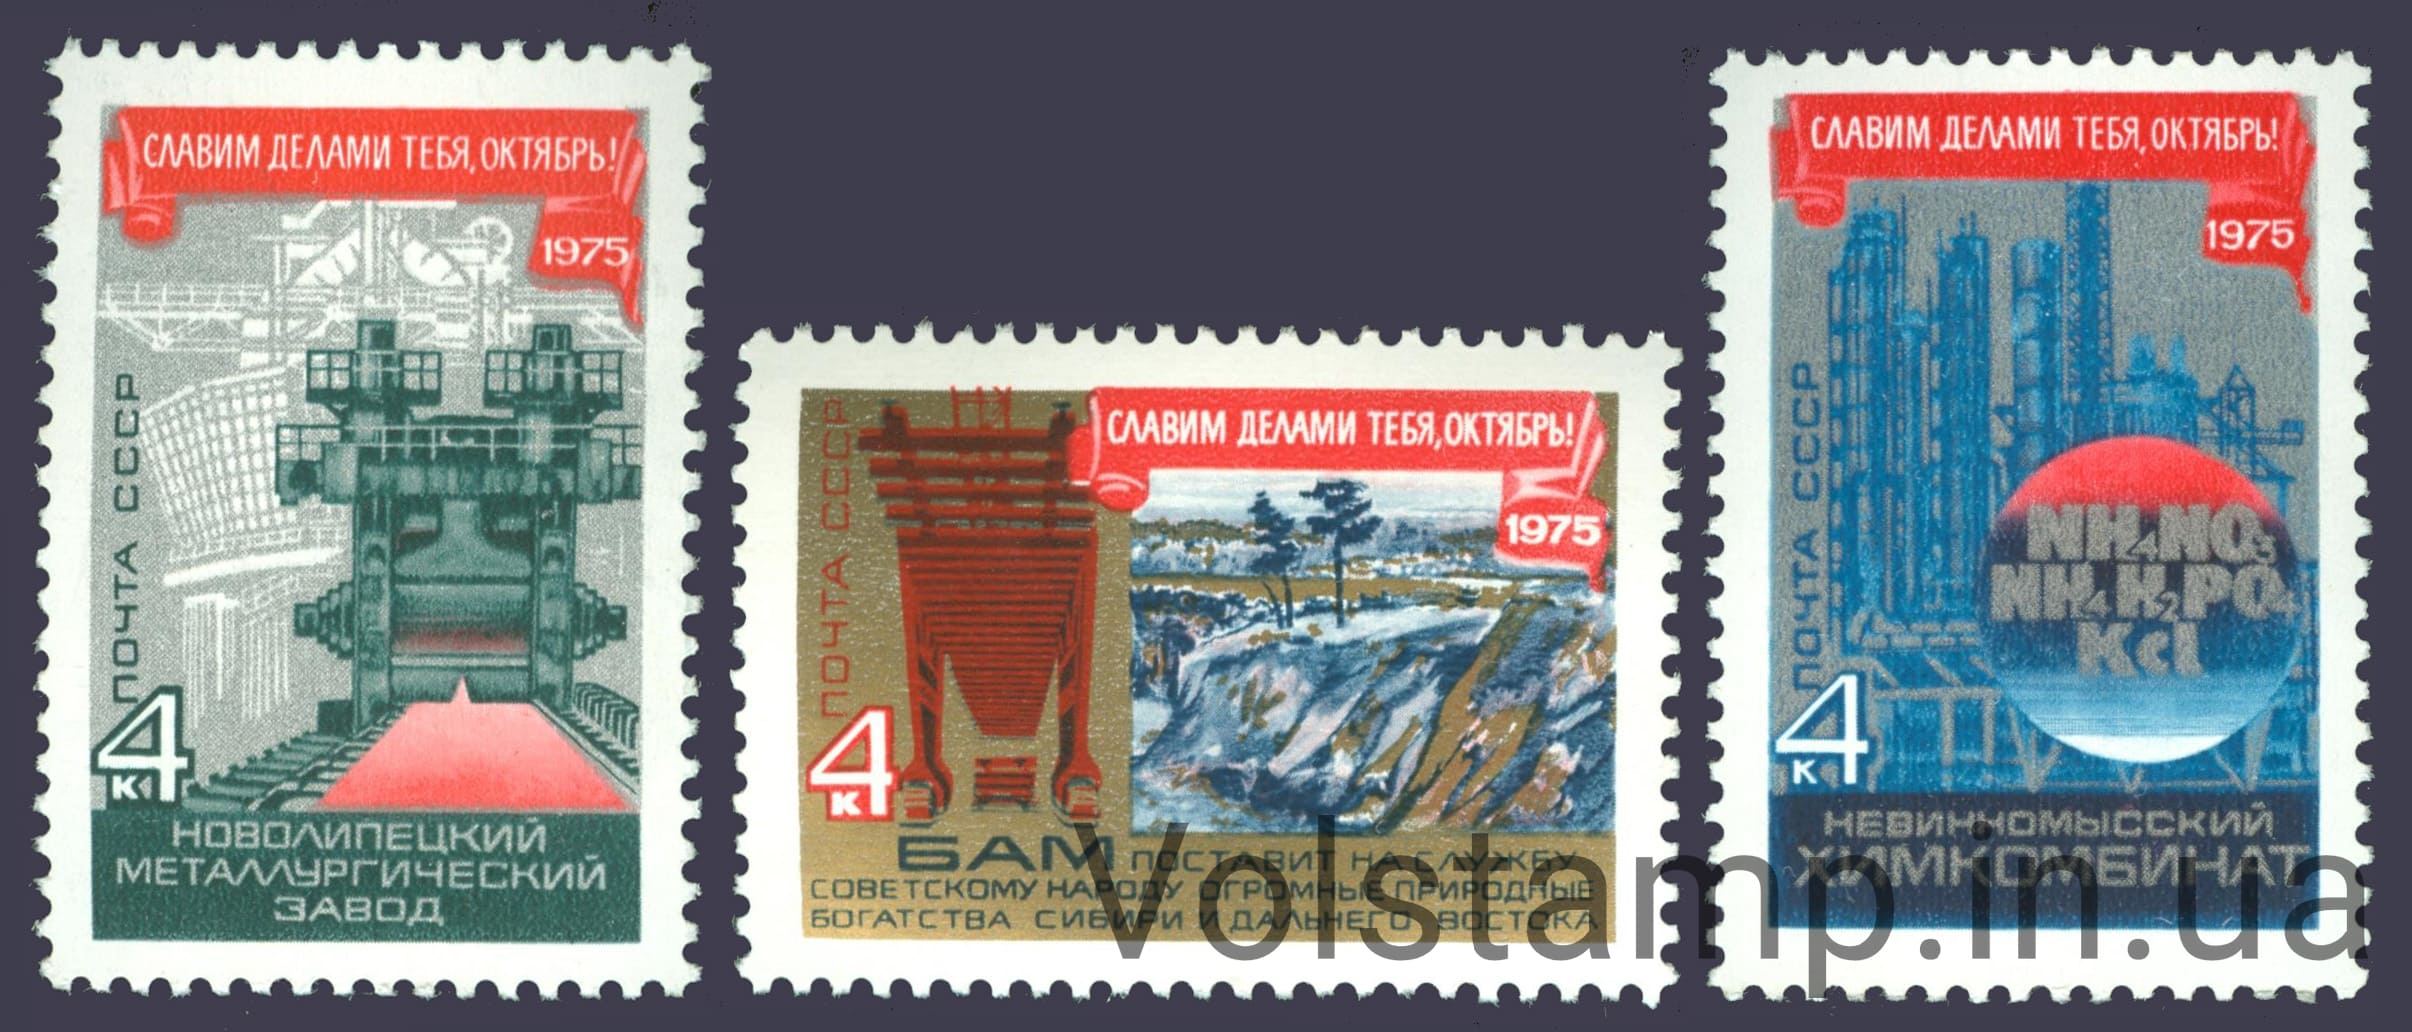 1975 series of stamps of 58 years of the October Socialist Revolution №4464-4466